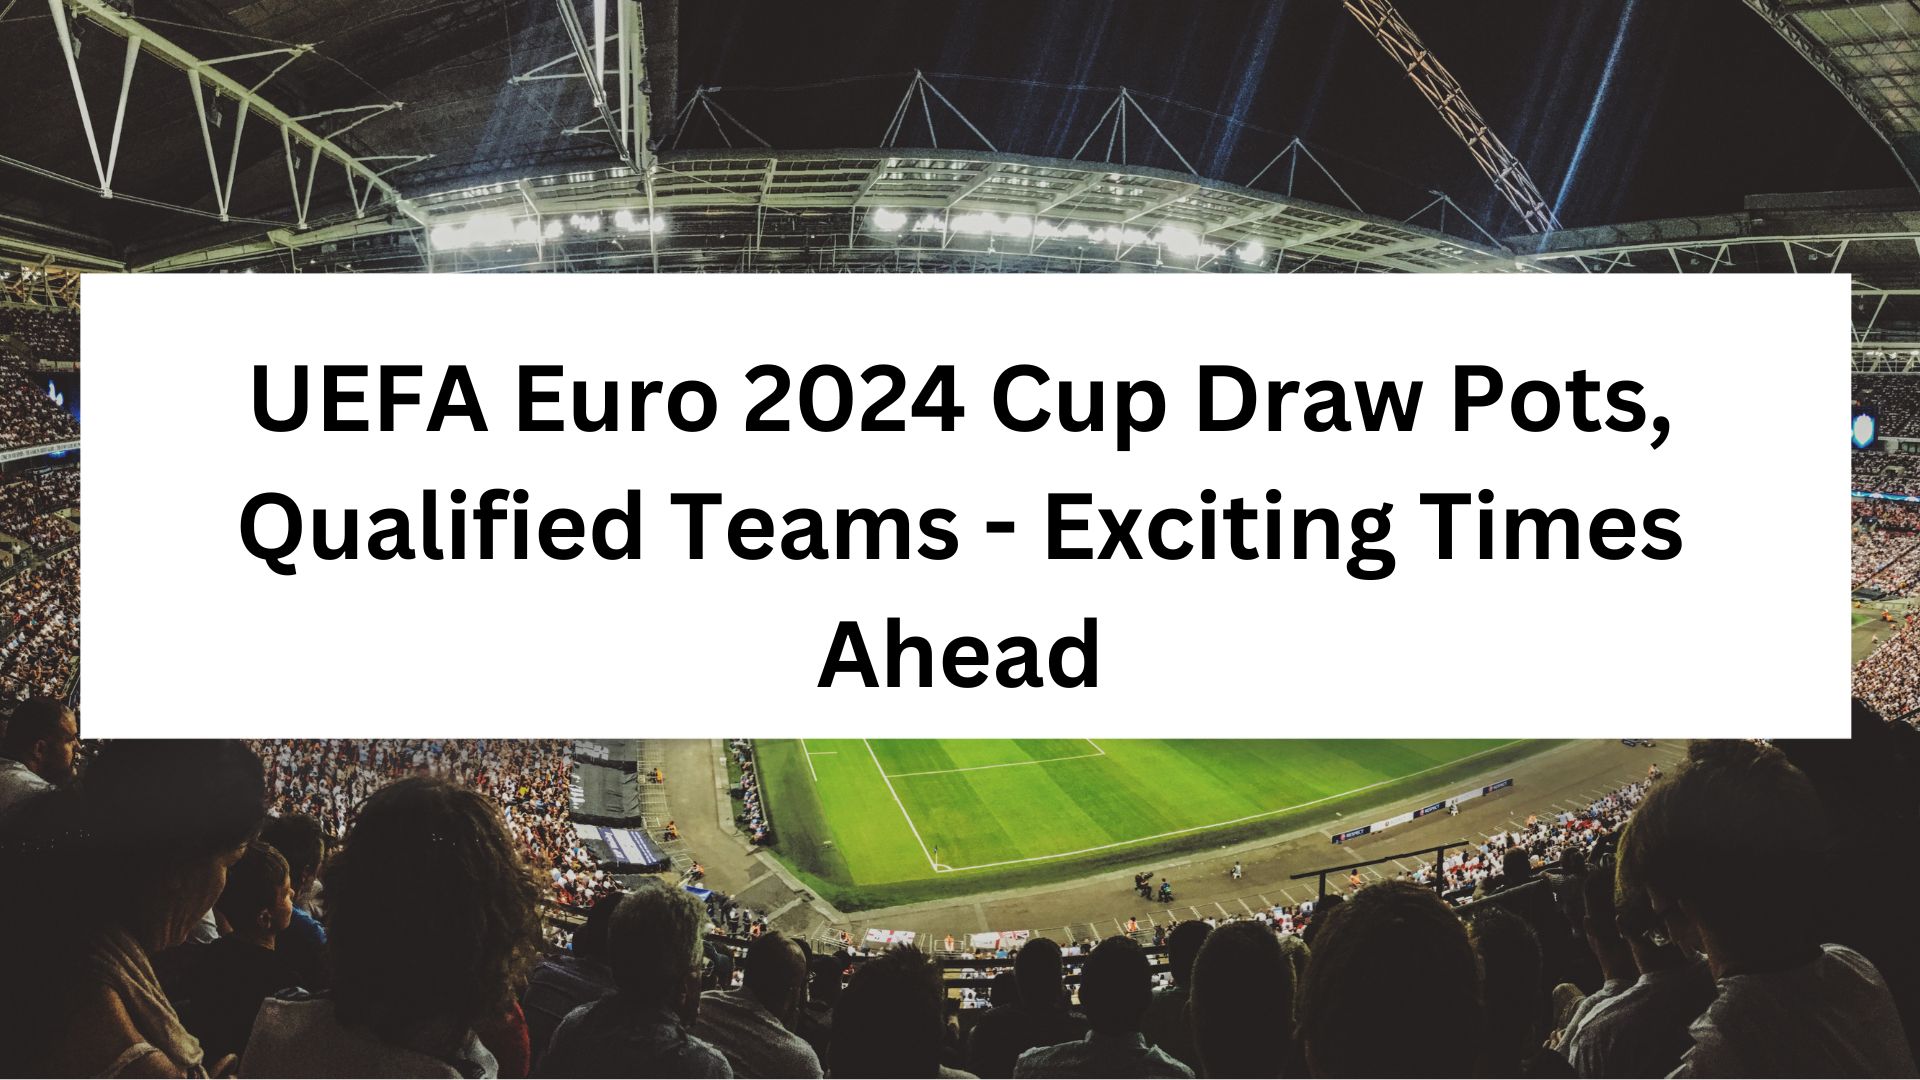 UEFA Euro 2024 Cup Draw Pots, Qualified Teams Exciting Times Ahead